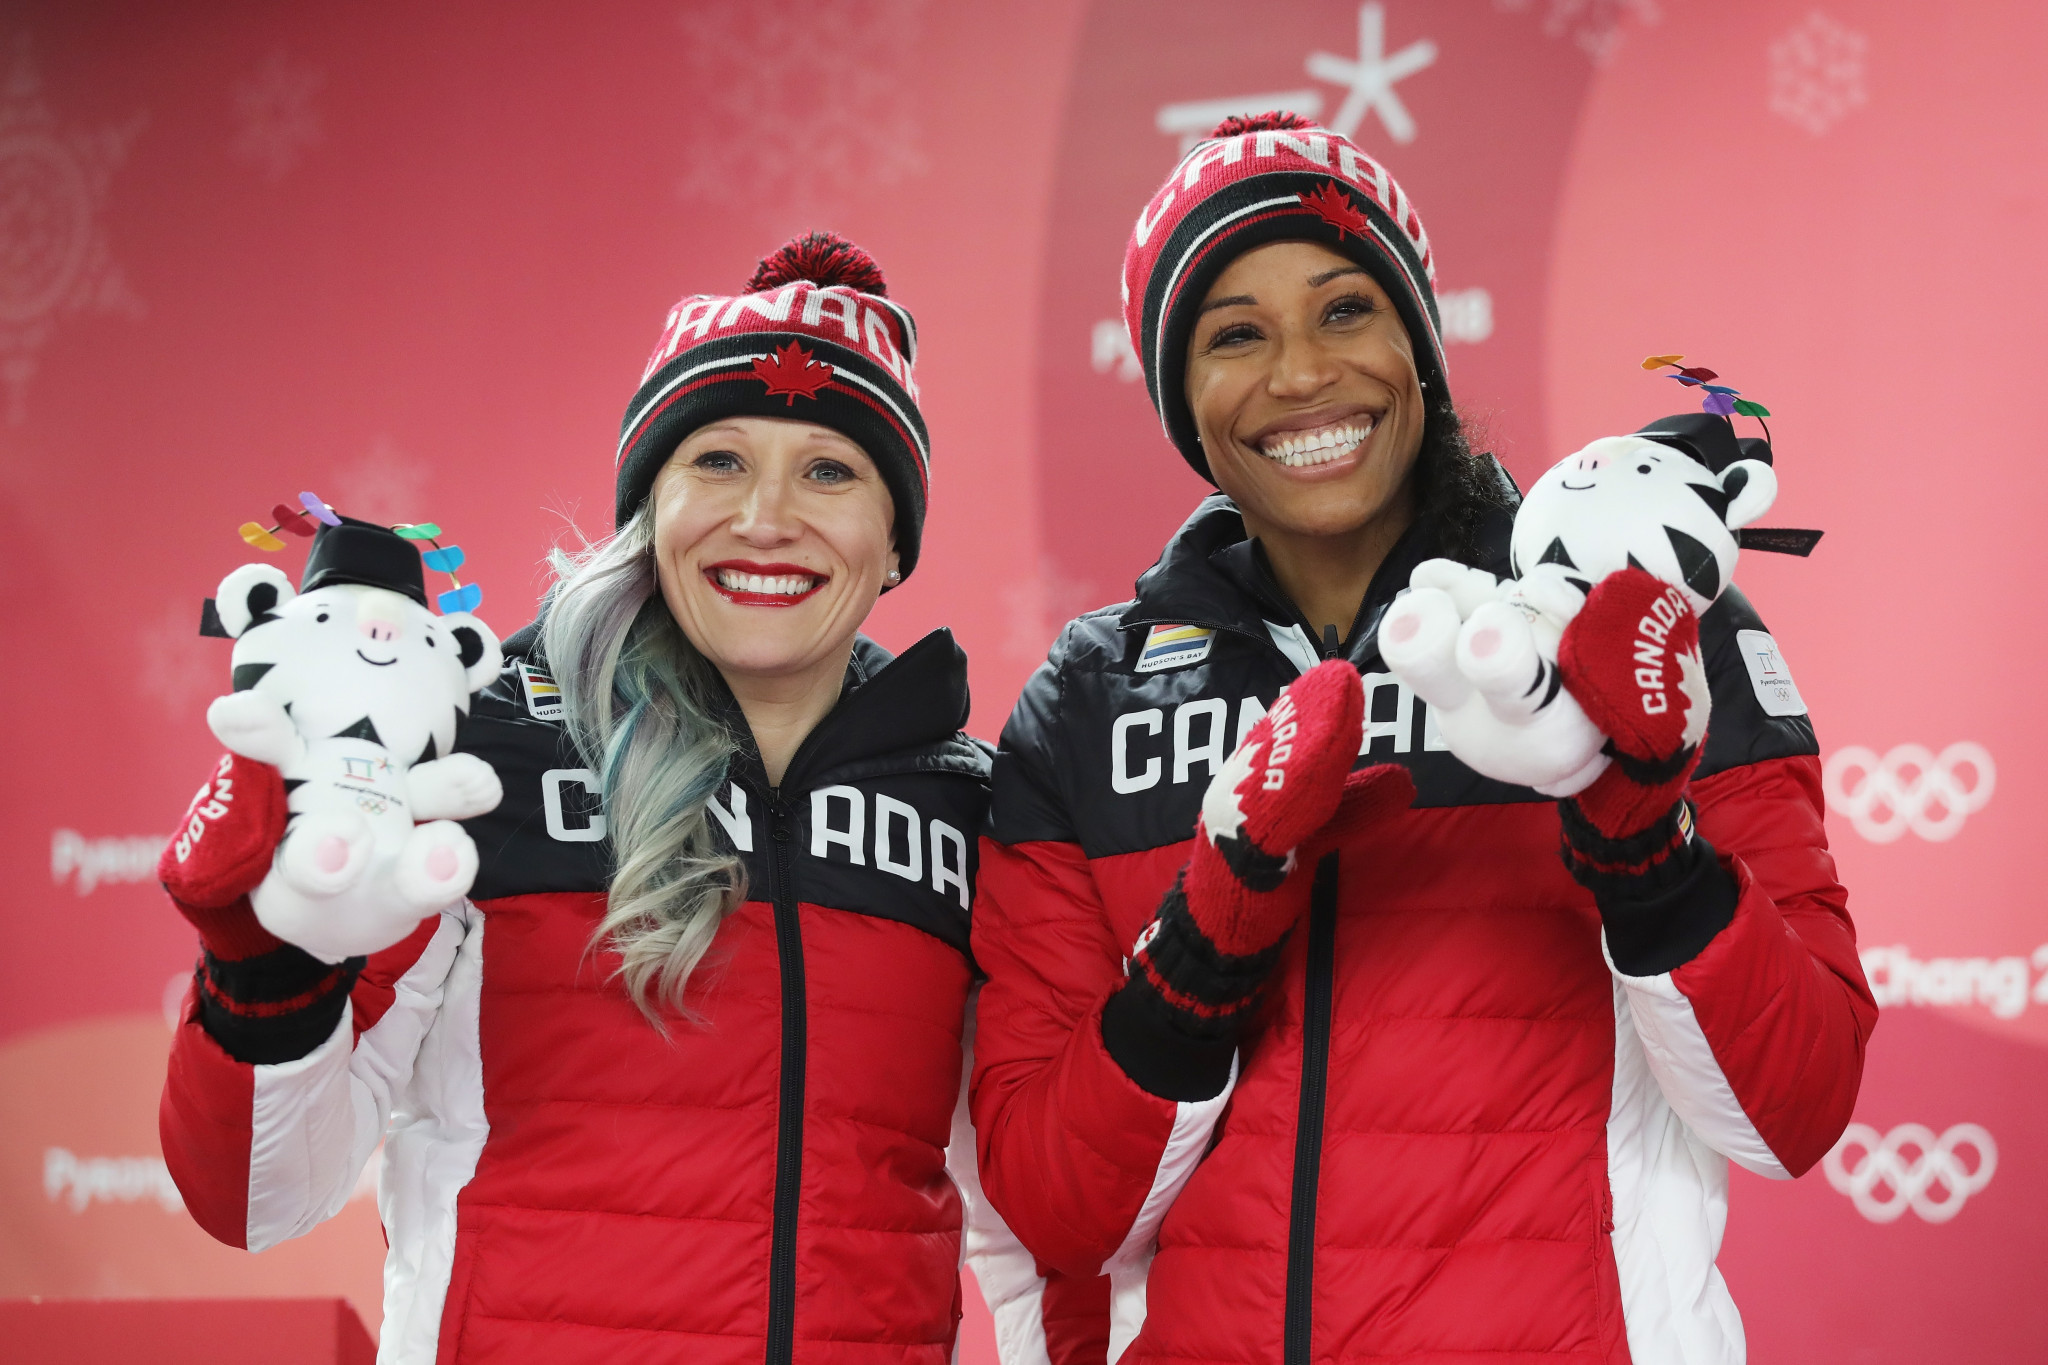 Kaillie Humphries, who competed for Canada at three Winter Olympics, won two-woman bronze with Phylicia George at Pyeongchang 2018 ©Getty Images